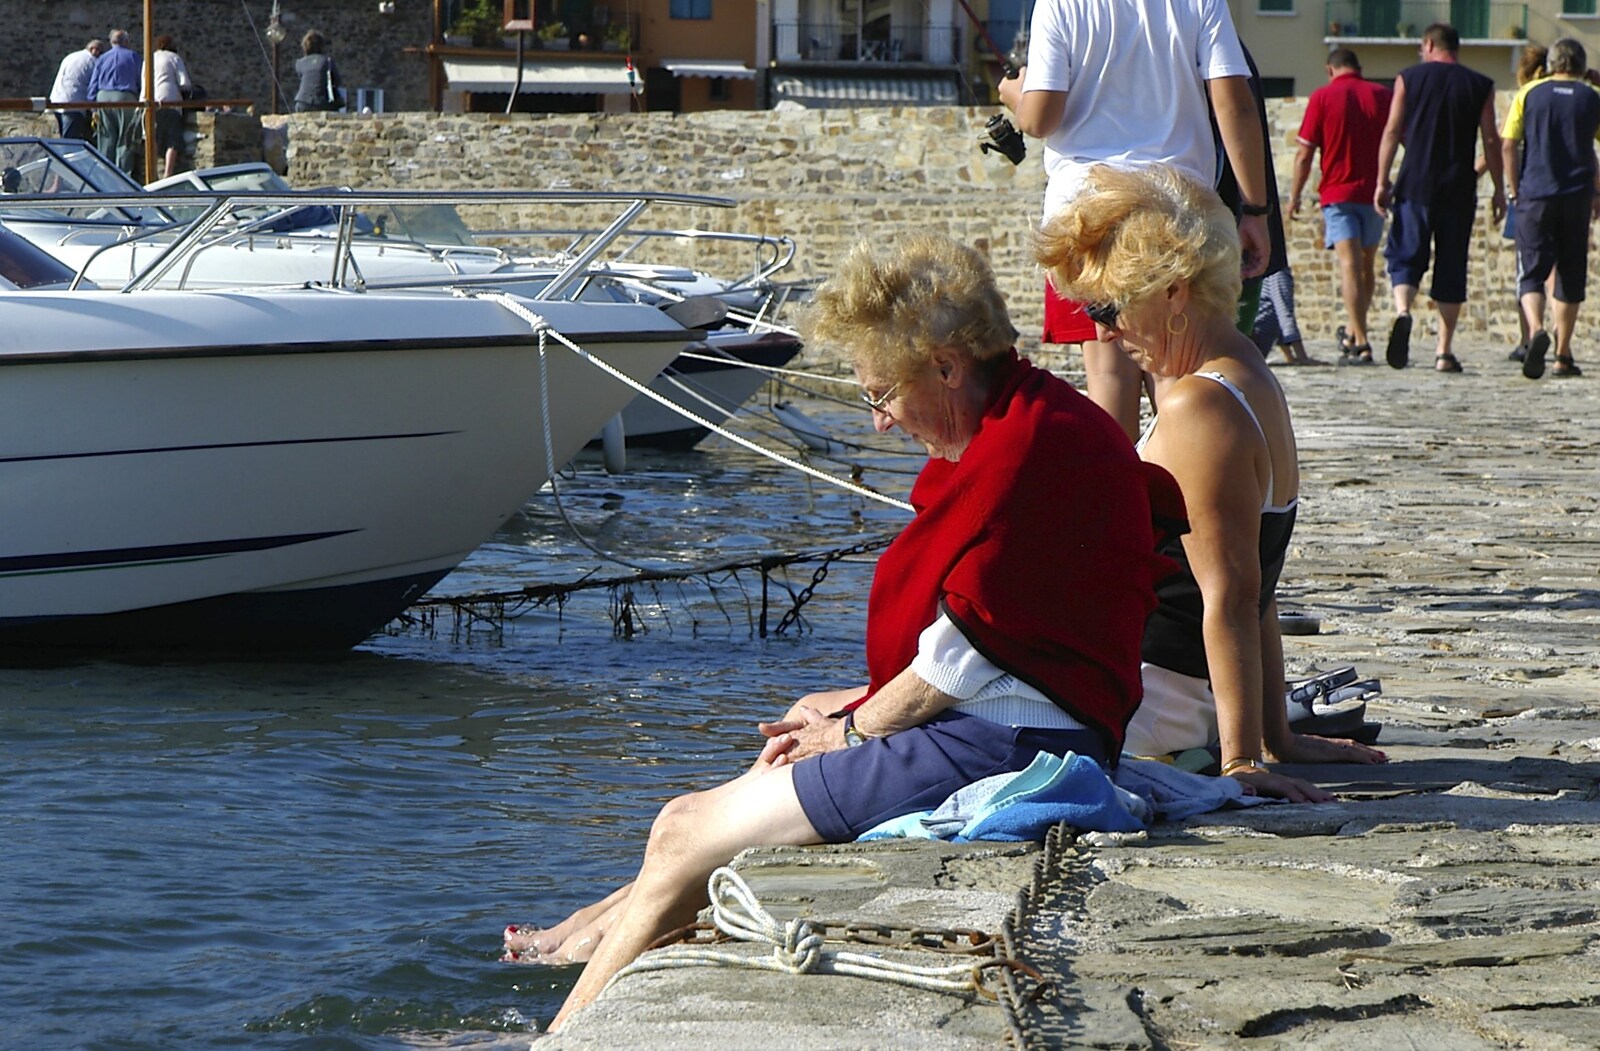 A couple of women have a paddle on the breakwater from The Colourful Boats of Collioure, France - 20th September 2006